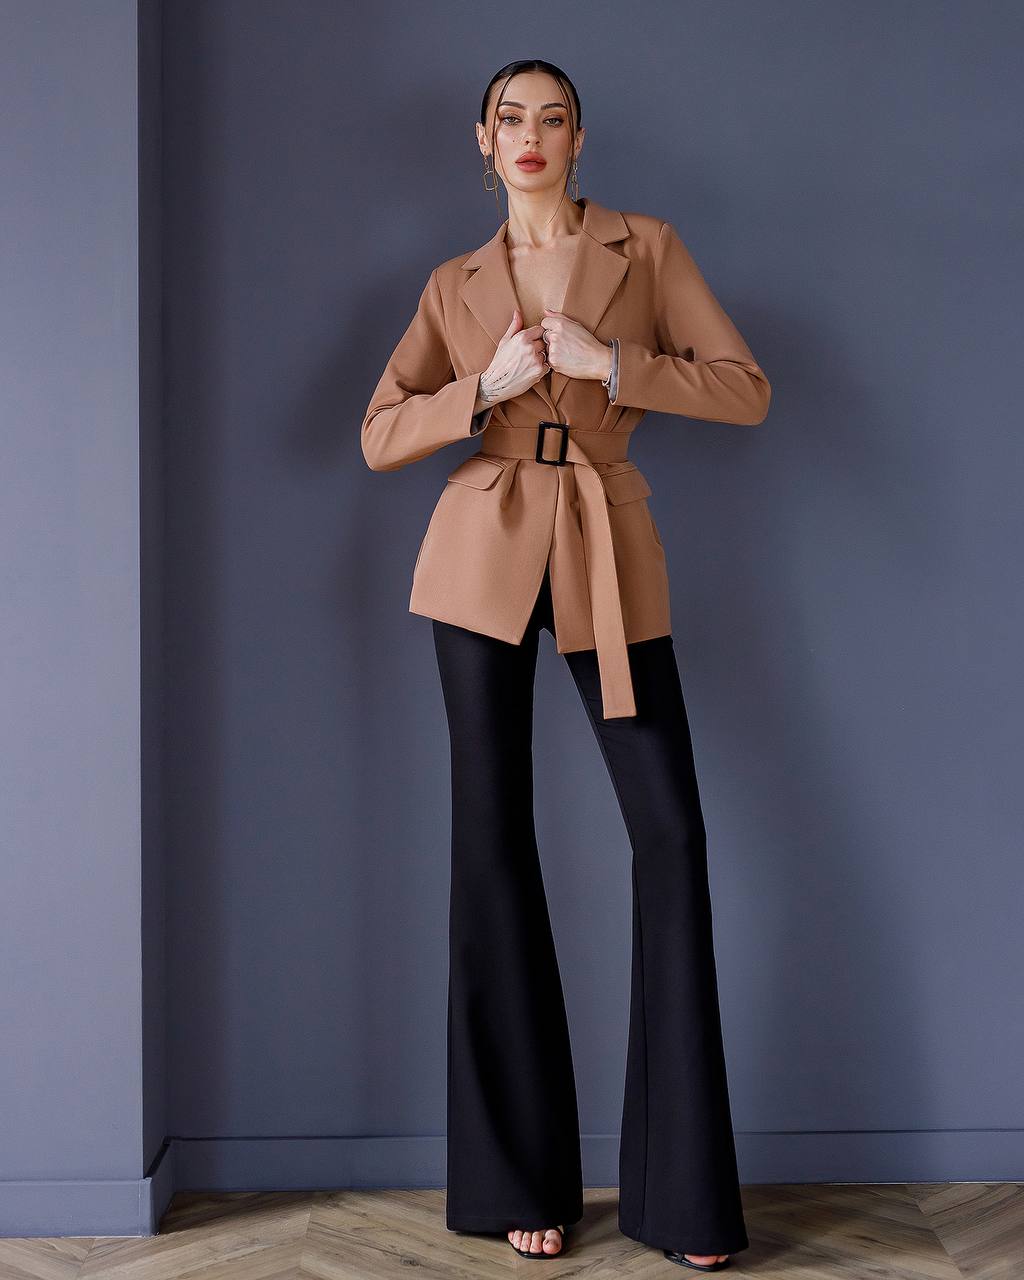 a woman in a tan coat and black pants